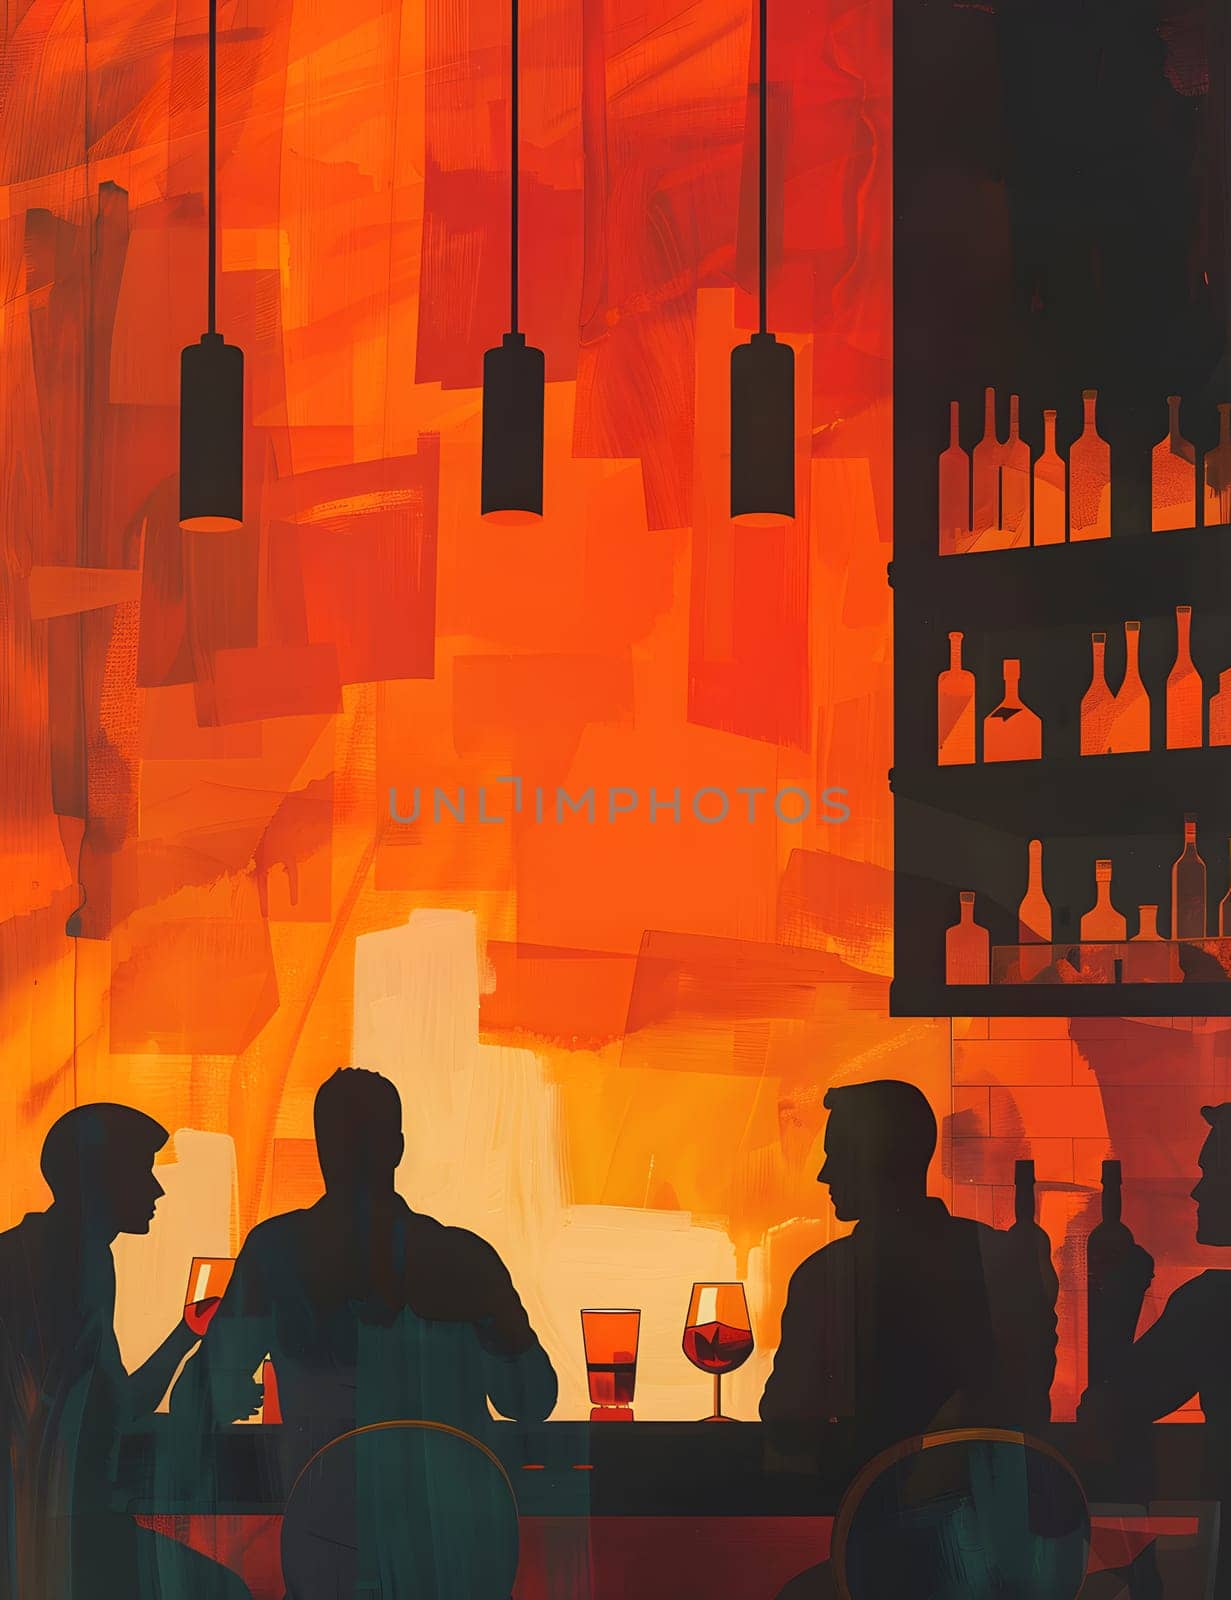 A group of patrons savors wine in a dimly lit bar adorned with art on the walls by Nadtochiy